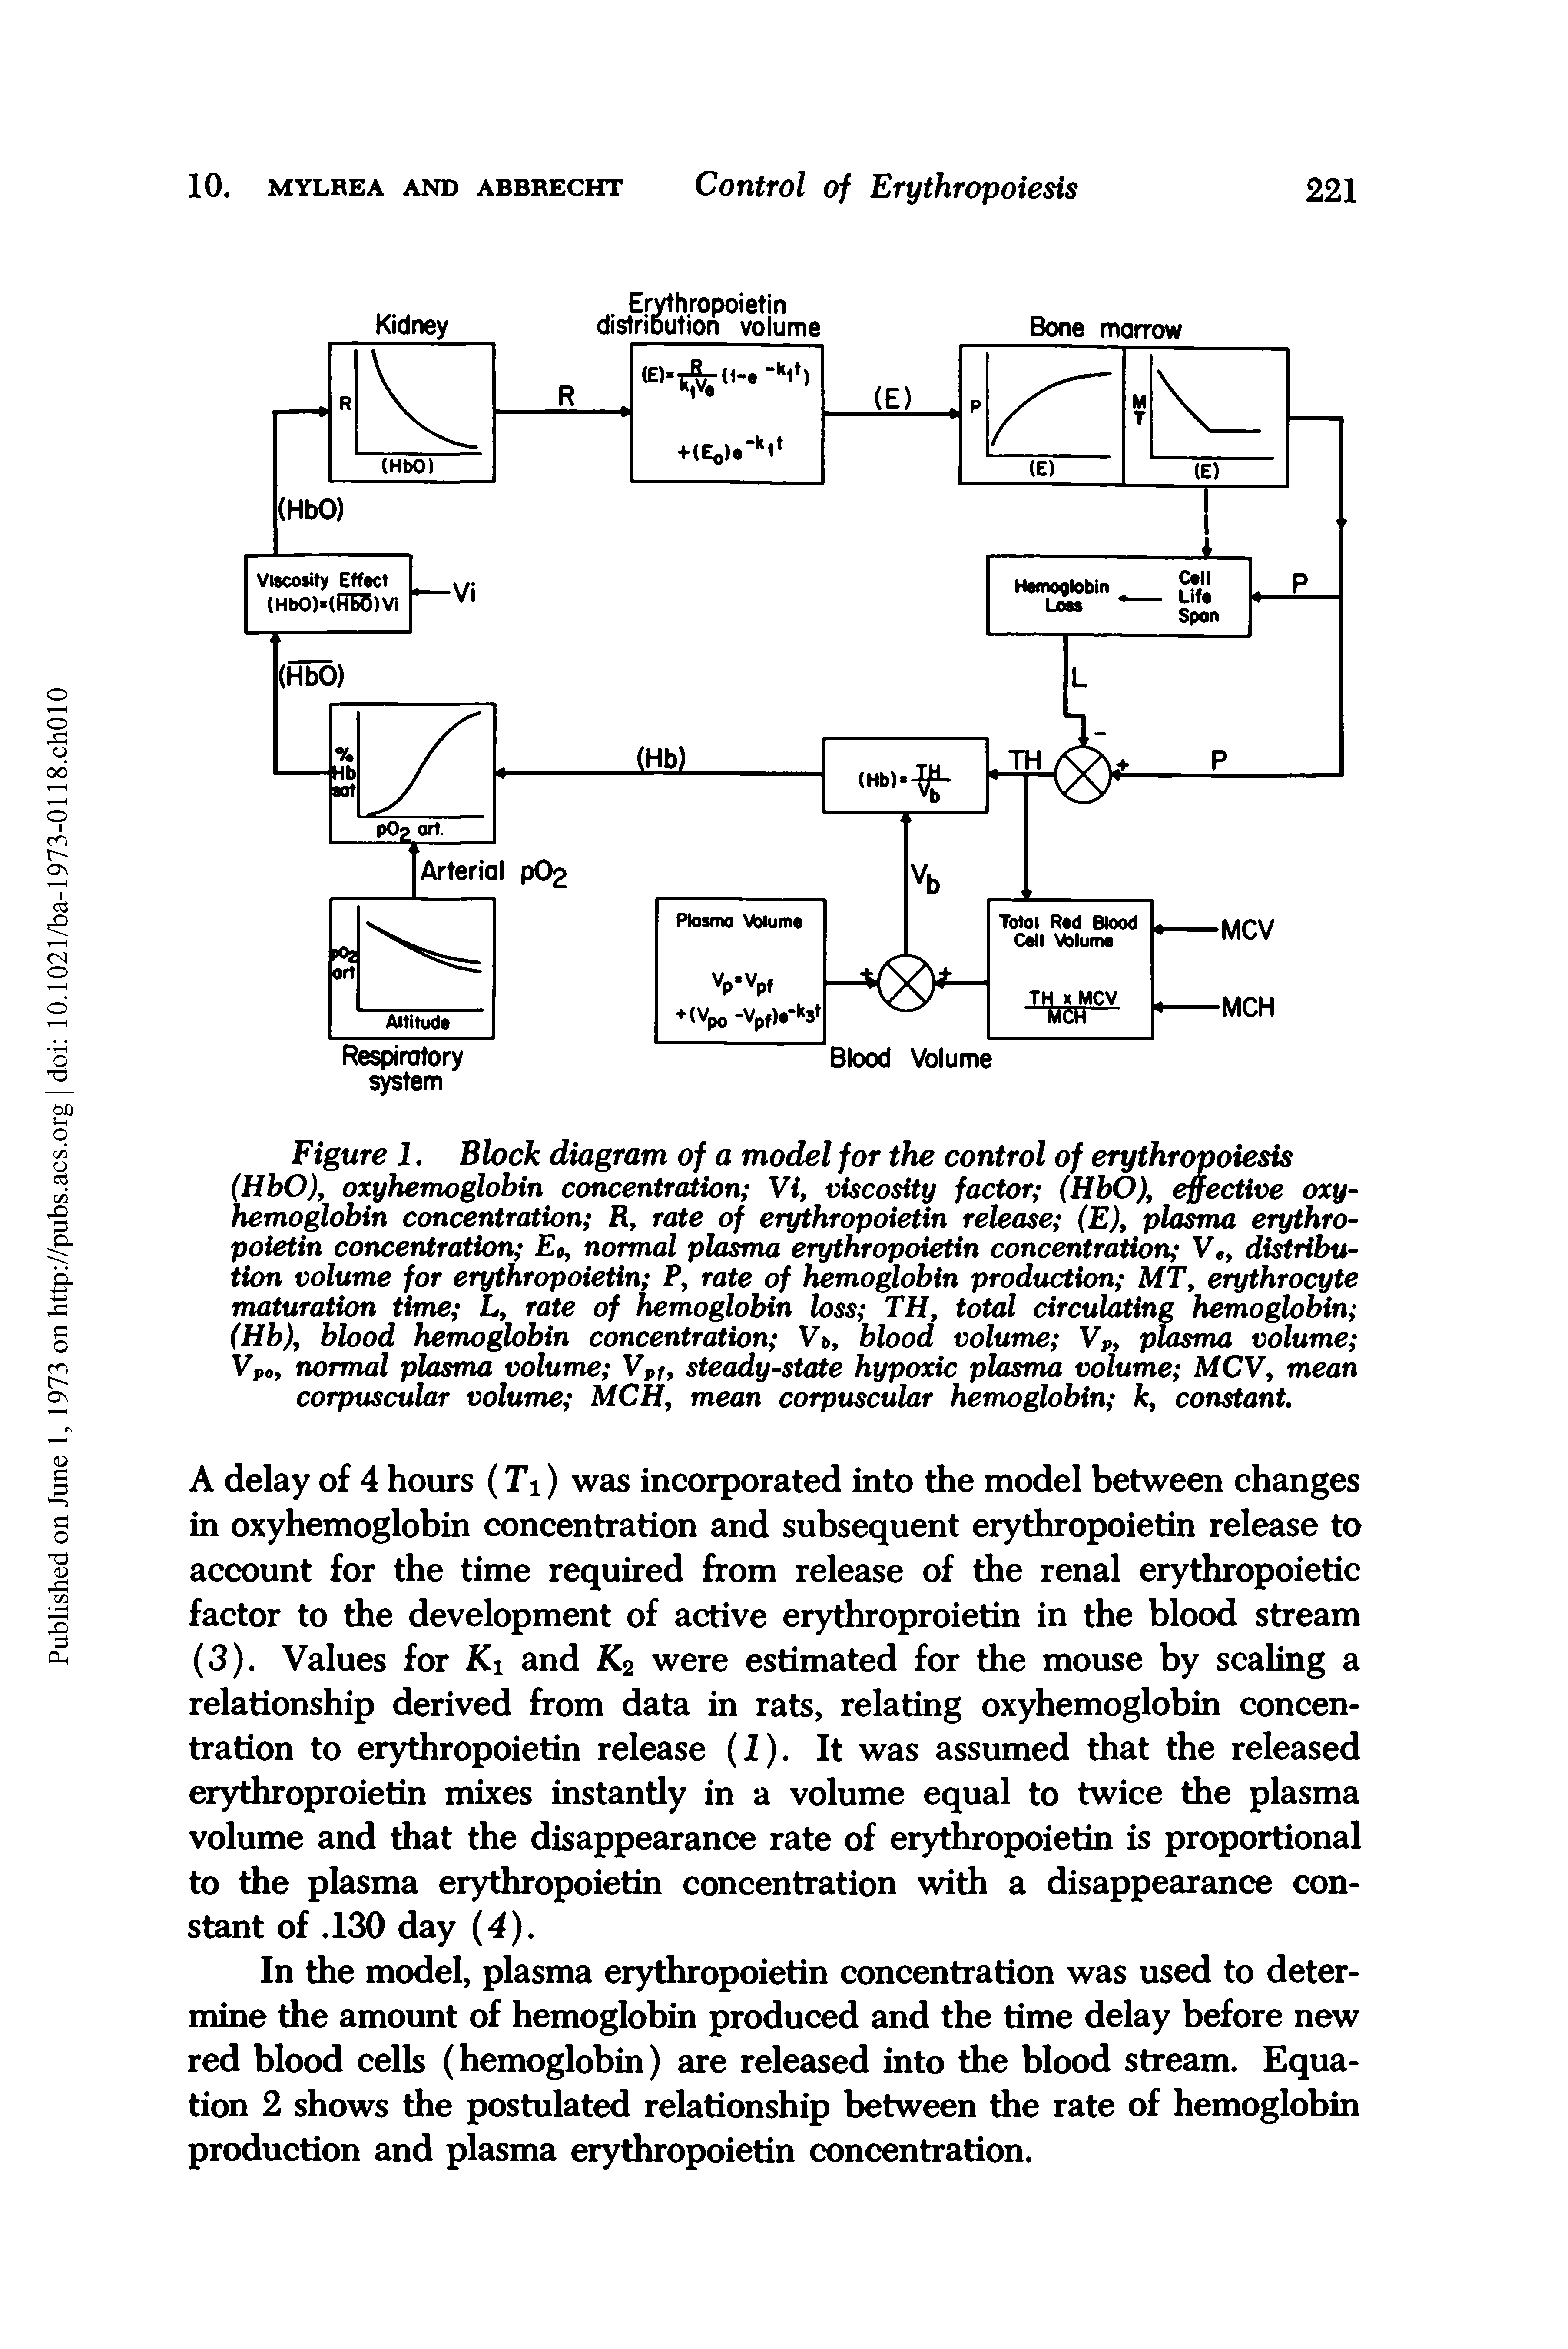 Figure 1. Block diagram of a model for the control of erythropoiesis (HbO), oxyhemoglobin concentration Vi, viscosity factor (HbO), effective oxyhemoglobin concentration R, rate of erythropoietin release (E), plasma erythropoietin concentration E0, normal plasma erythropoietin concentration V , distribution volume for erythropoietin P, rate of hemoglobin production MT, erythrocyte maturation time L, rate of hemoglobin loss TH, total circulating hemoglobin (Hb), blood hemoglobin concentration Vb, blood volume Vp, plasma volume Vp0, normal plasma volume Vpf, steady-state hypoxic plasma volume MCV, mean corpuscular volume MCH, mean corpuscular hemoglobin k, constant...